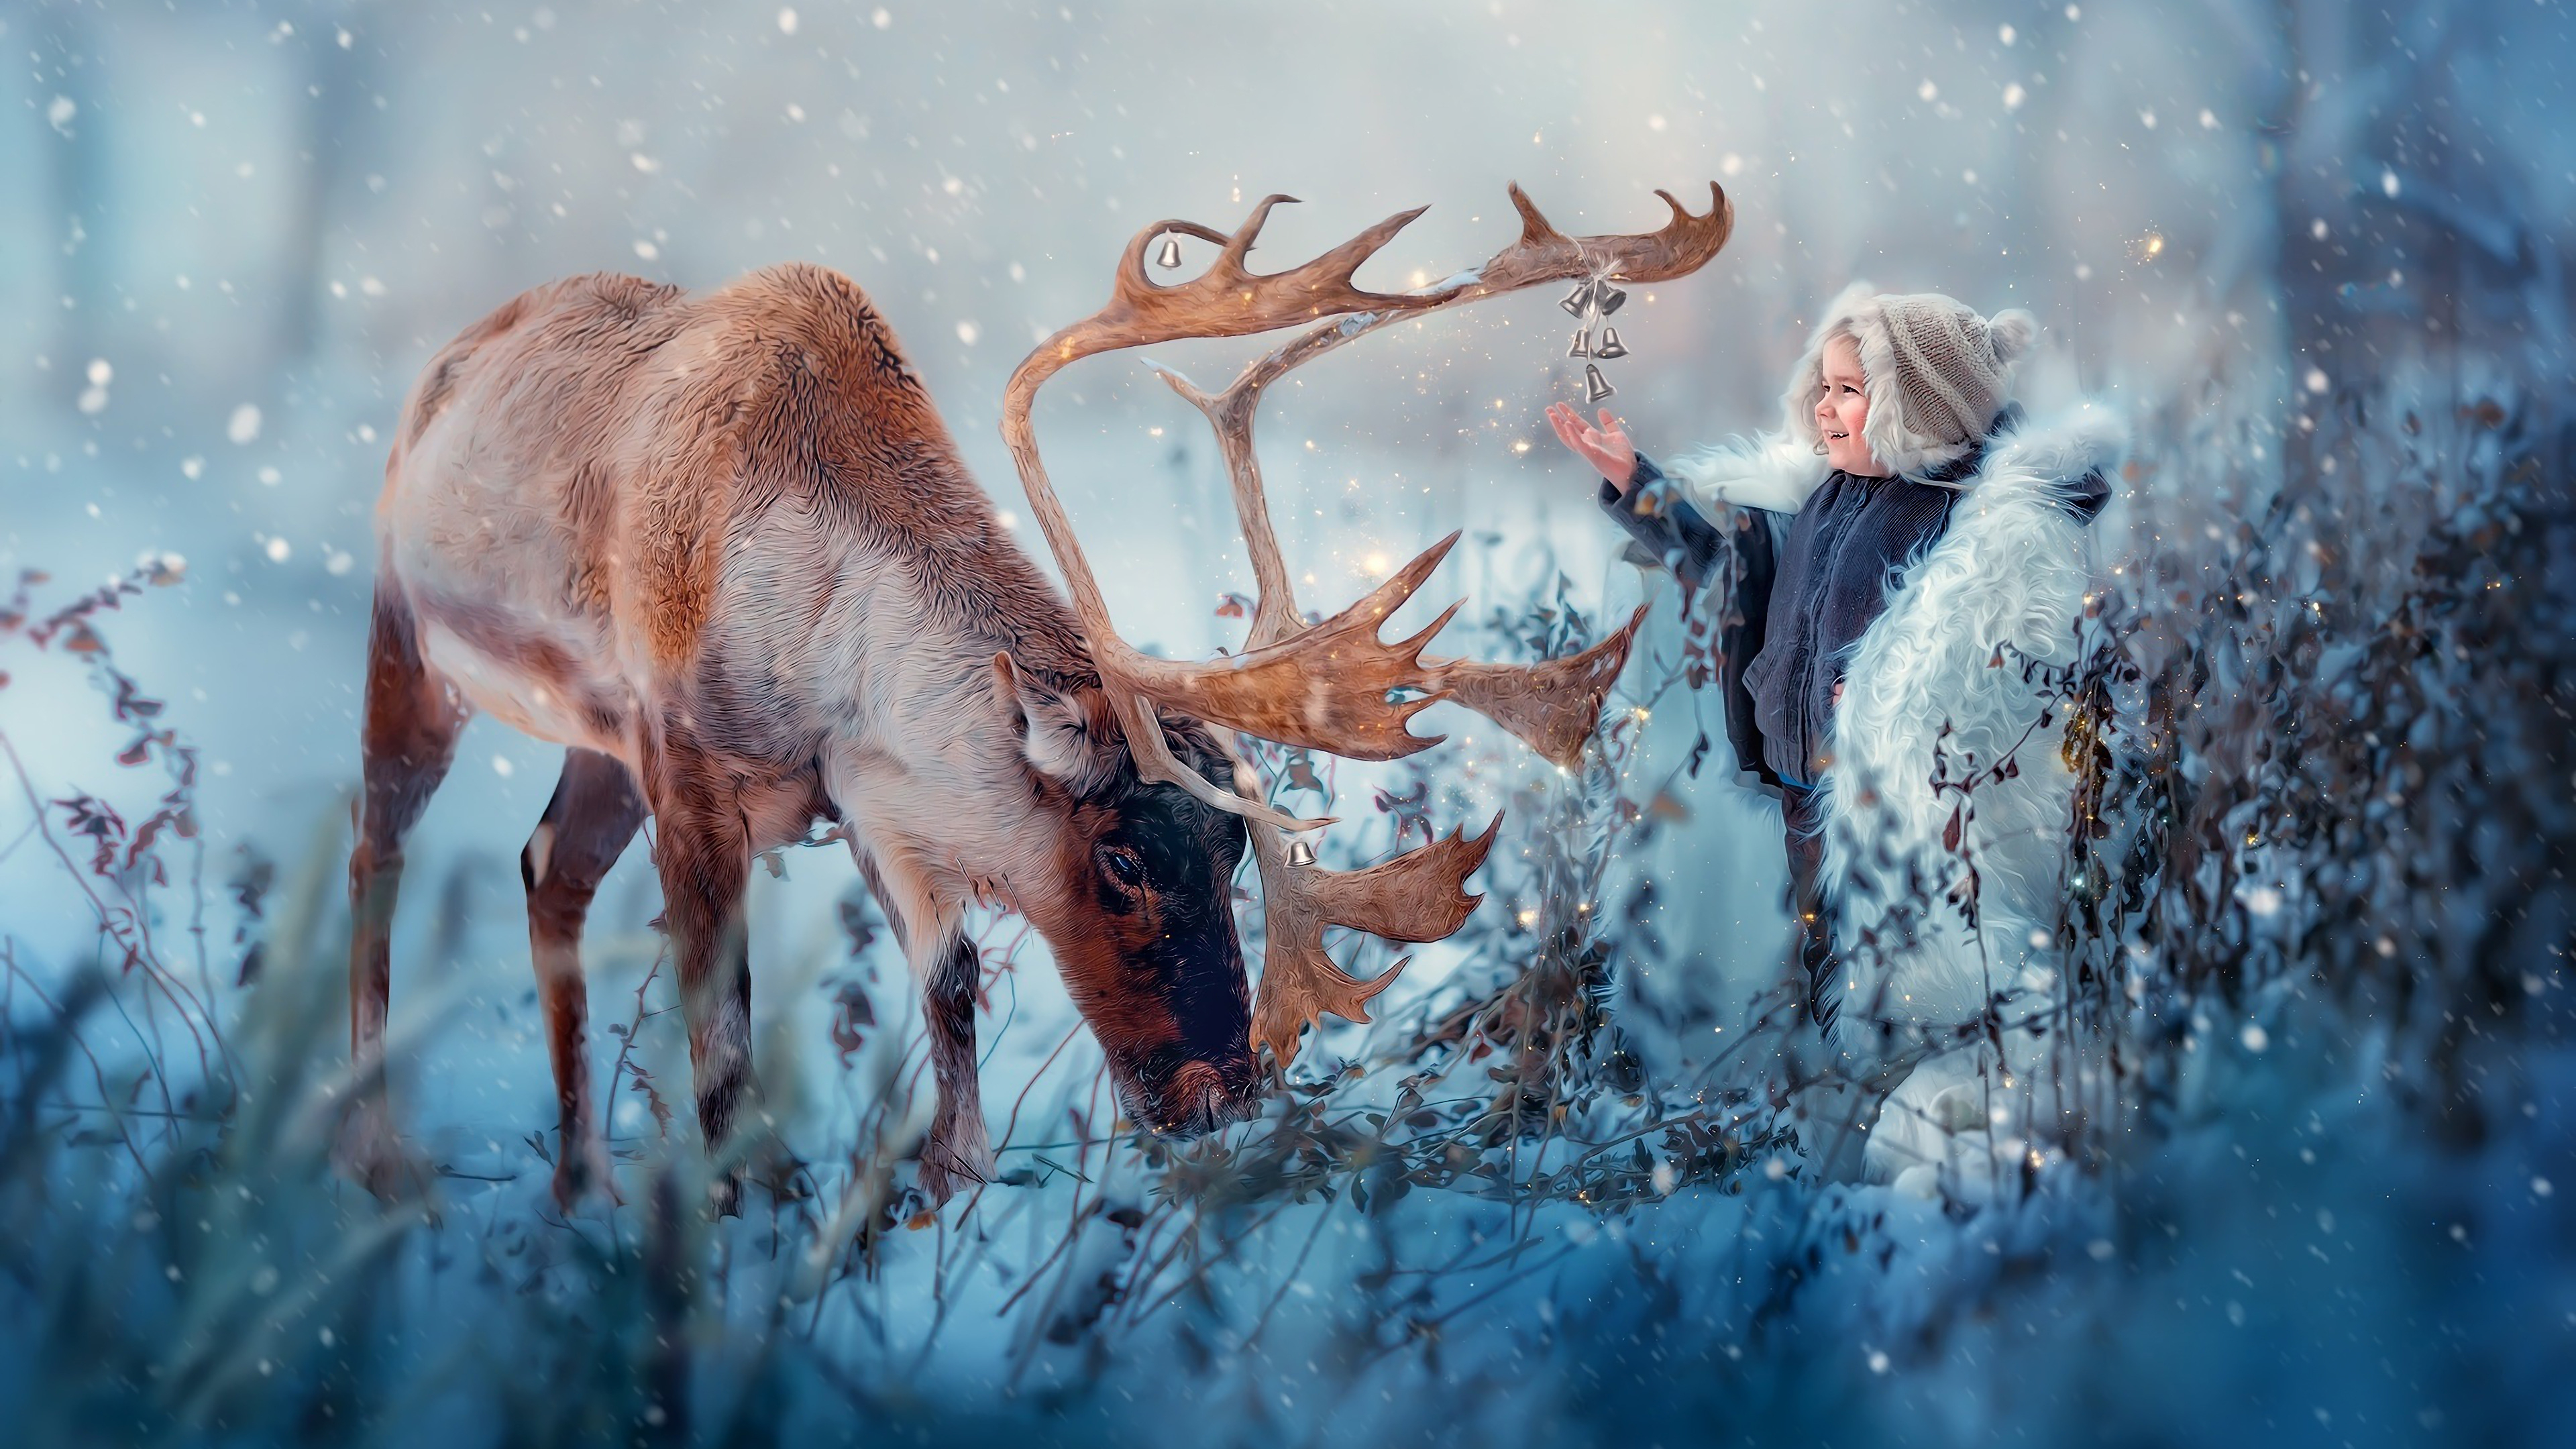 3840x2160 Reindeer with a child in snow Wallpaper 4k Ultra HD ID:4674